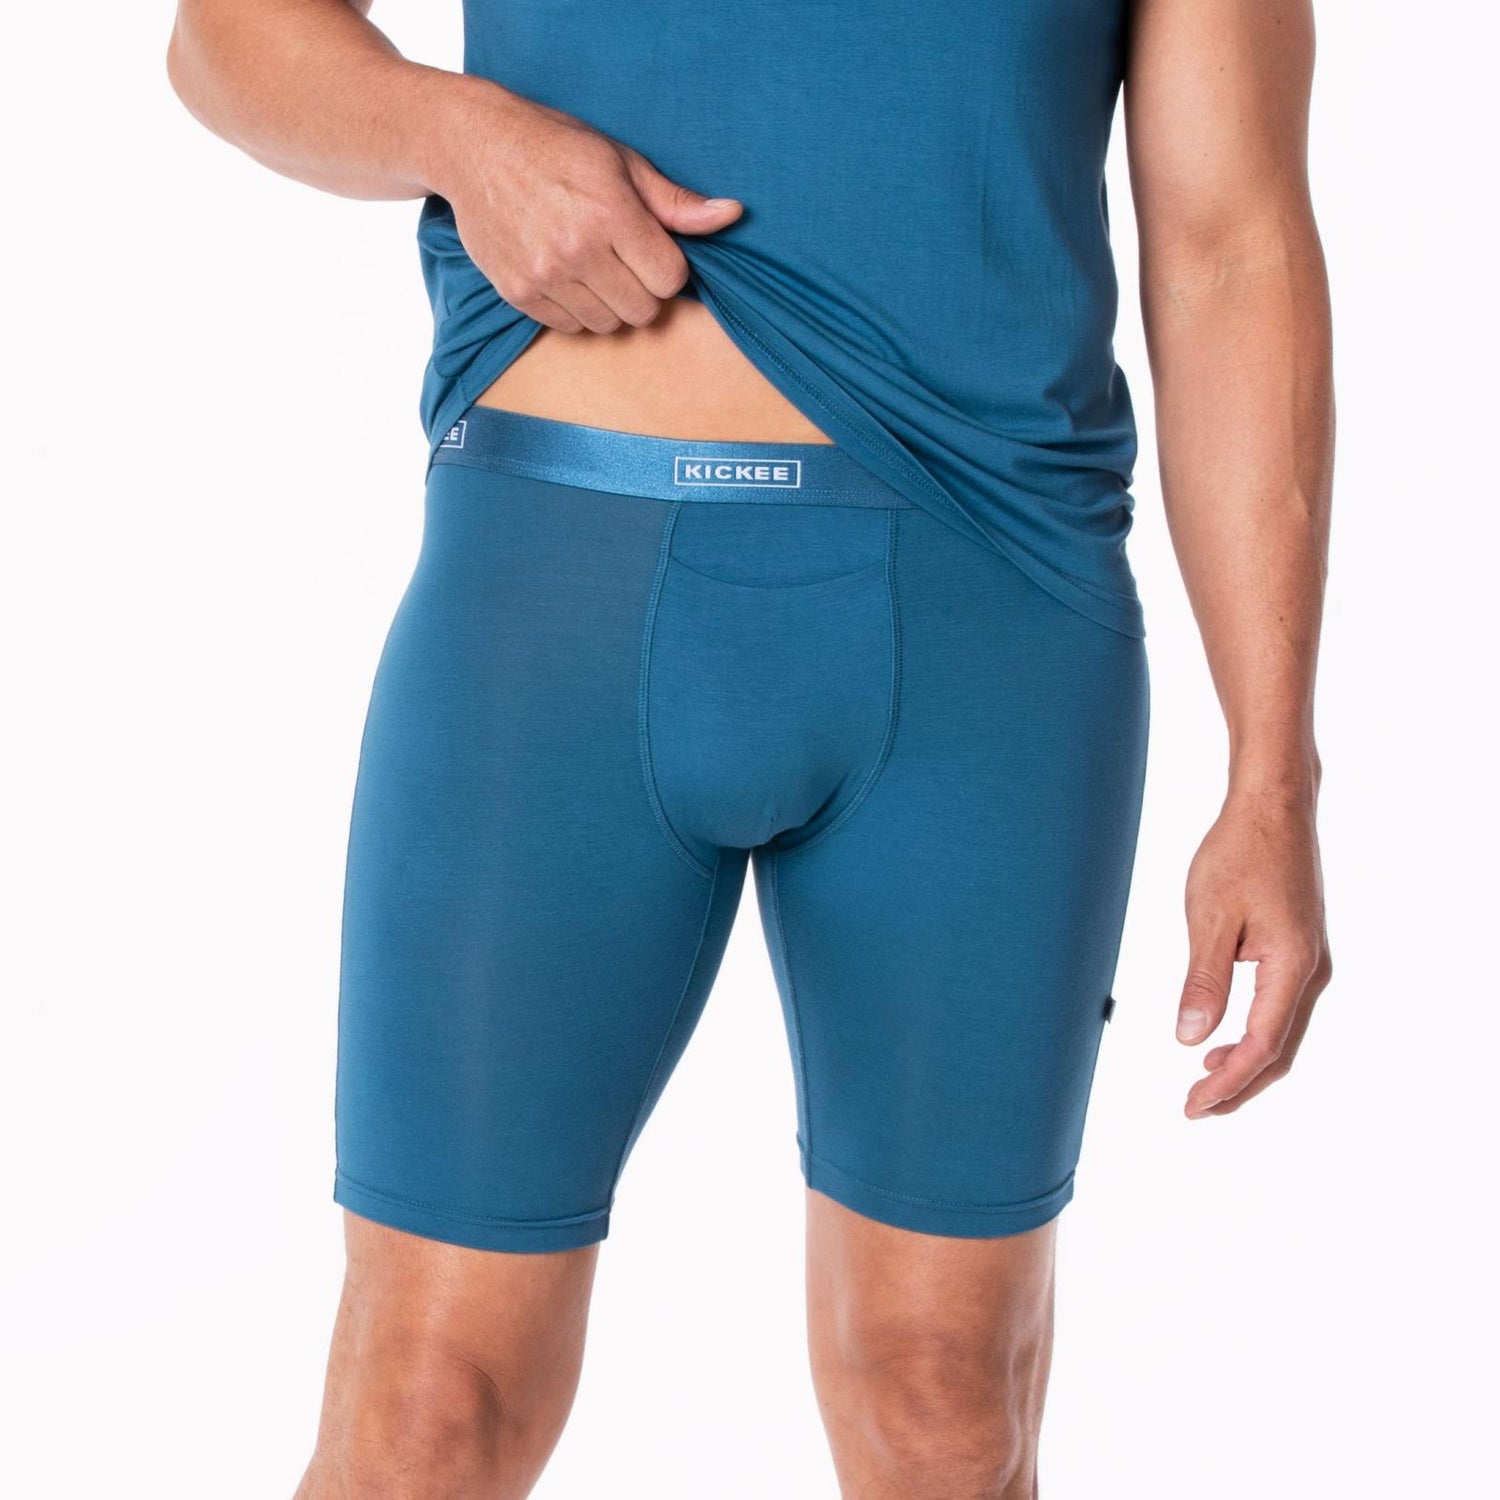 Men's Long Boxer Brief with Top Fly in Twilight